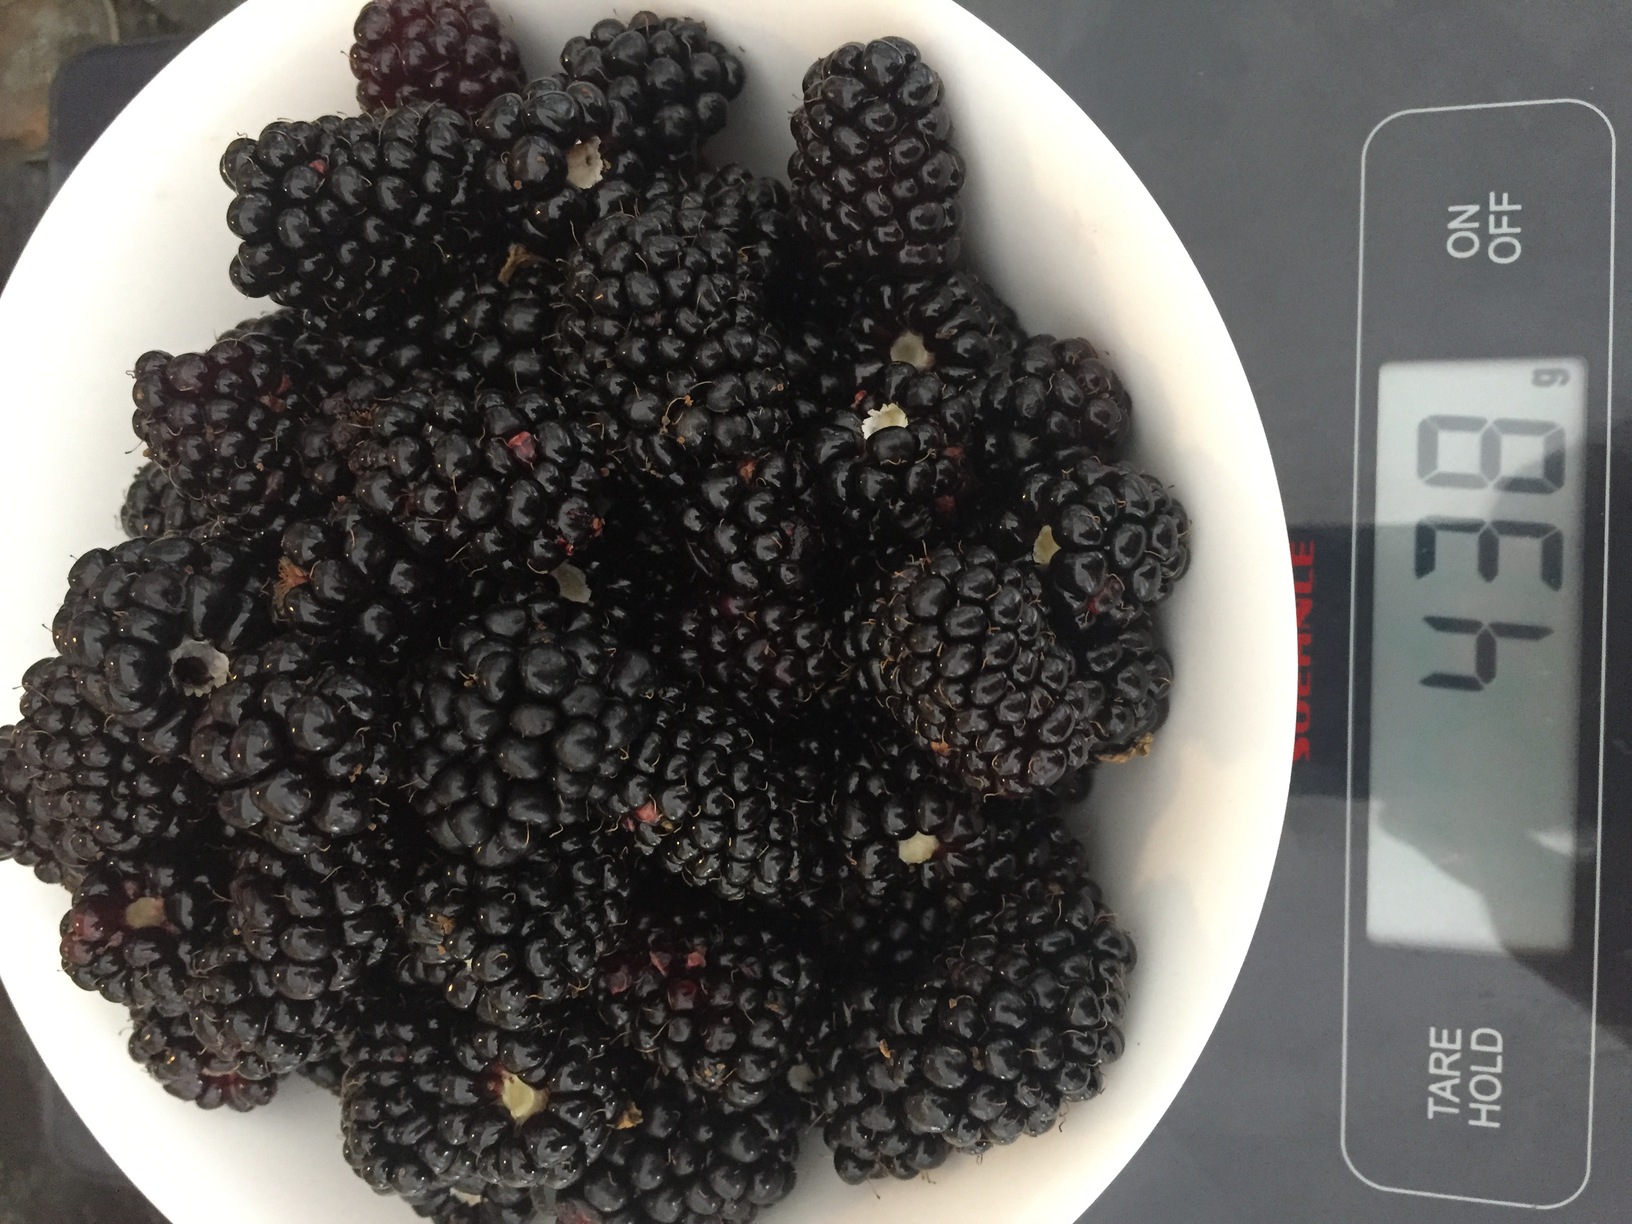 A nice bowl of blackberries. Time to try making a blackberry jam!